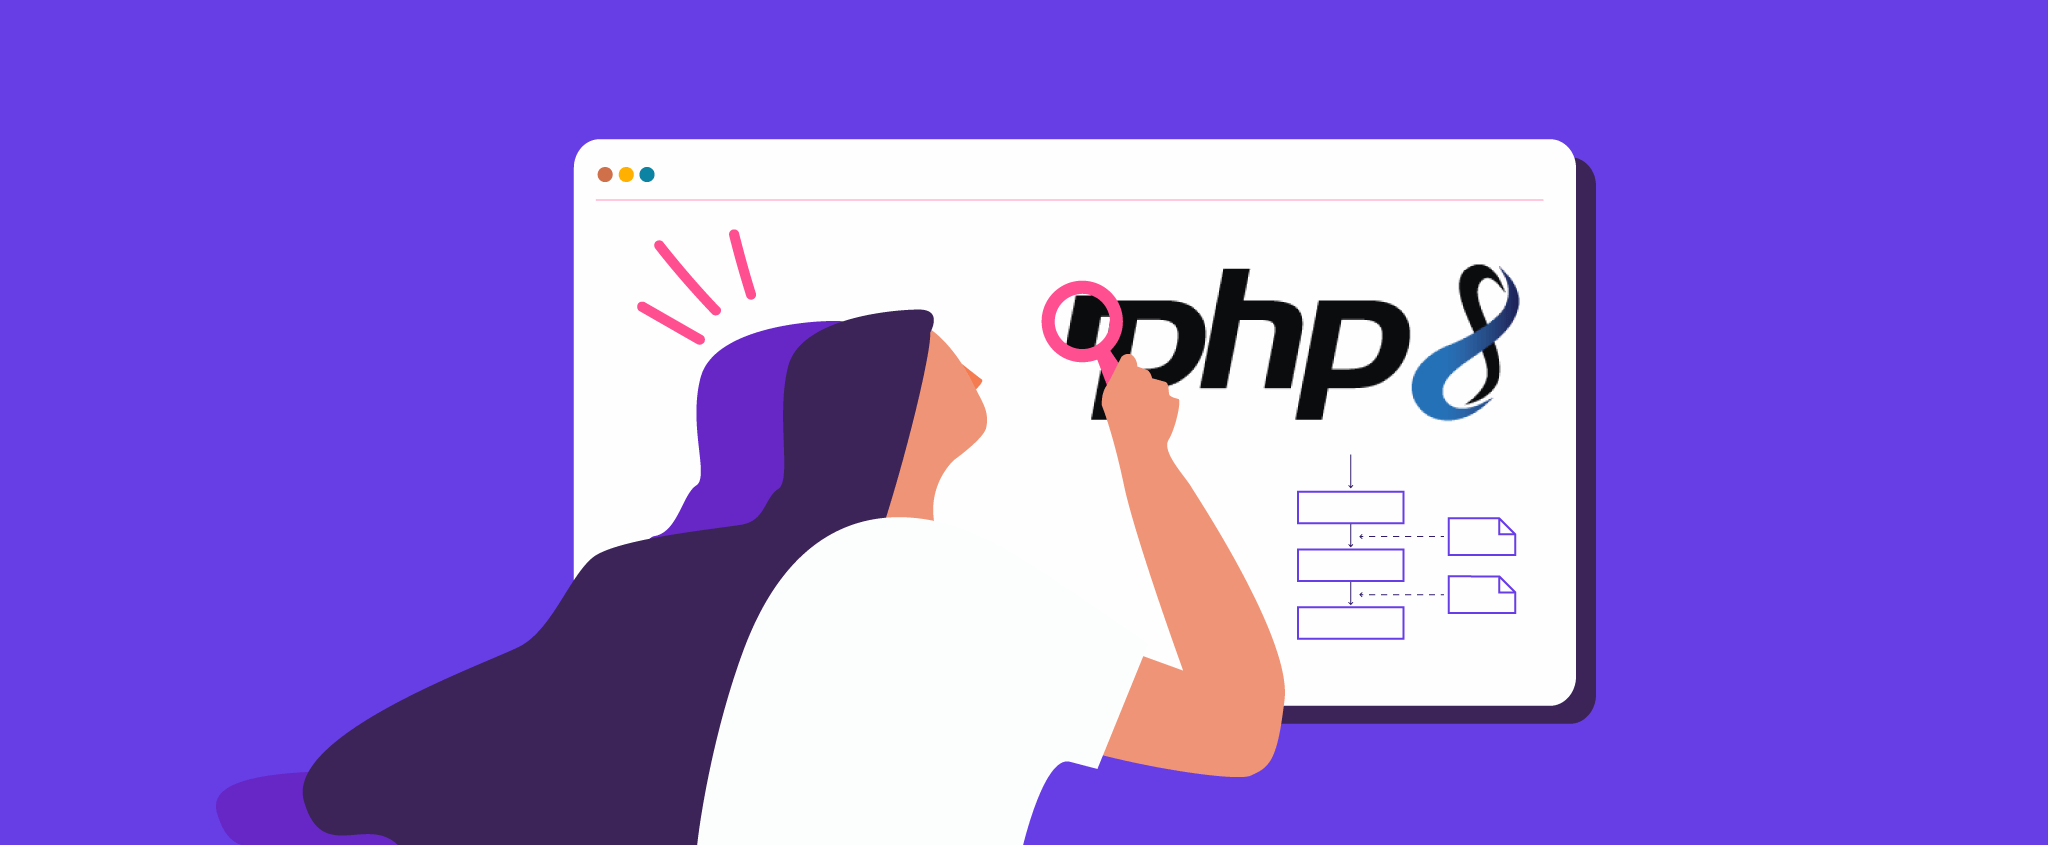 Php https ru wikipedia org. Php 8. Php 8 логотип. Операторы php. Php8 jit.